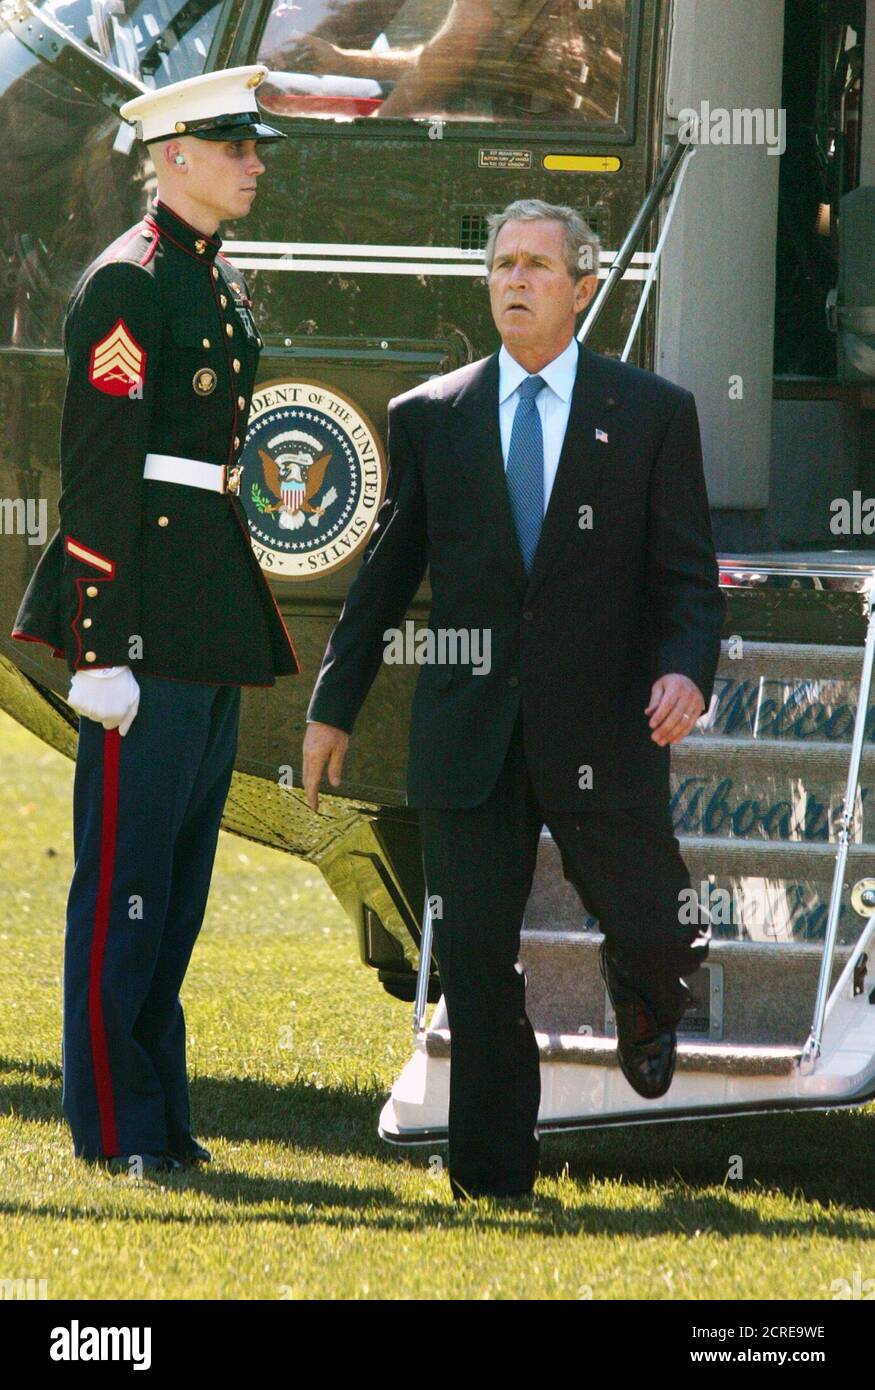 U.S. President George W. Bush steps off the Marine One helicopter on the South Lawn of the White House after returning from New York, September 13, 2002. Bush said on Thursday that Iraqi President Saddam Hussein had engaged in a 'decade of defiance' of post-Gulf War U.N. demands by developing weapons of mass destruction. He urged the United Nations to enforce its own resolutions and said if it did not, 'action will be unavoidable.' REUTERS/Hyungwon Kang  HK/HB Stock Photo